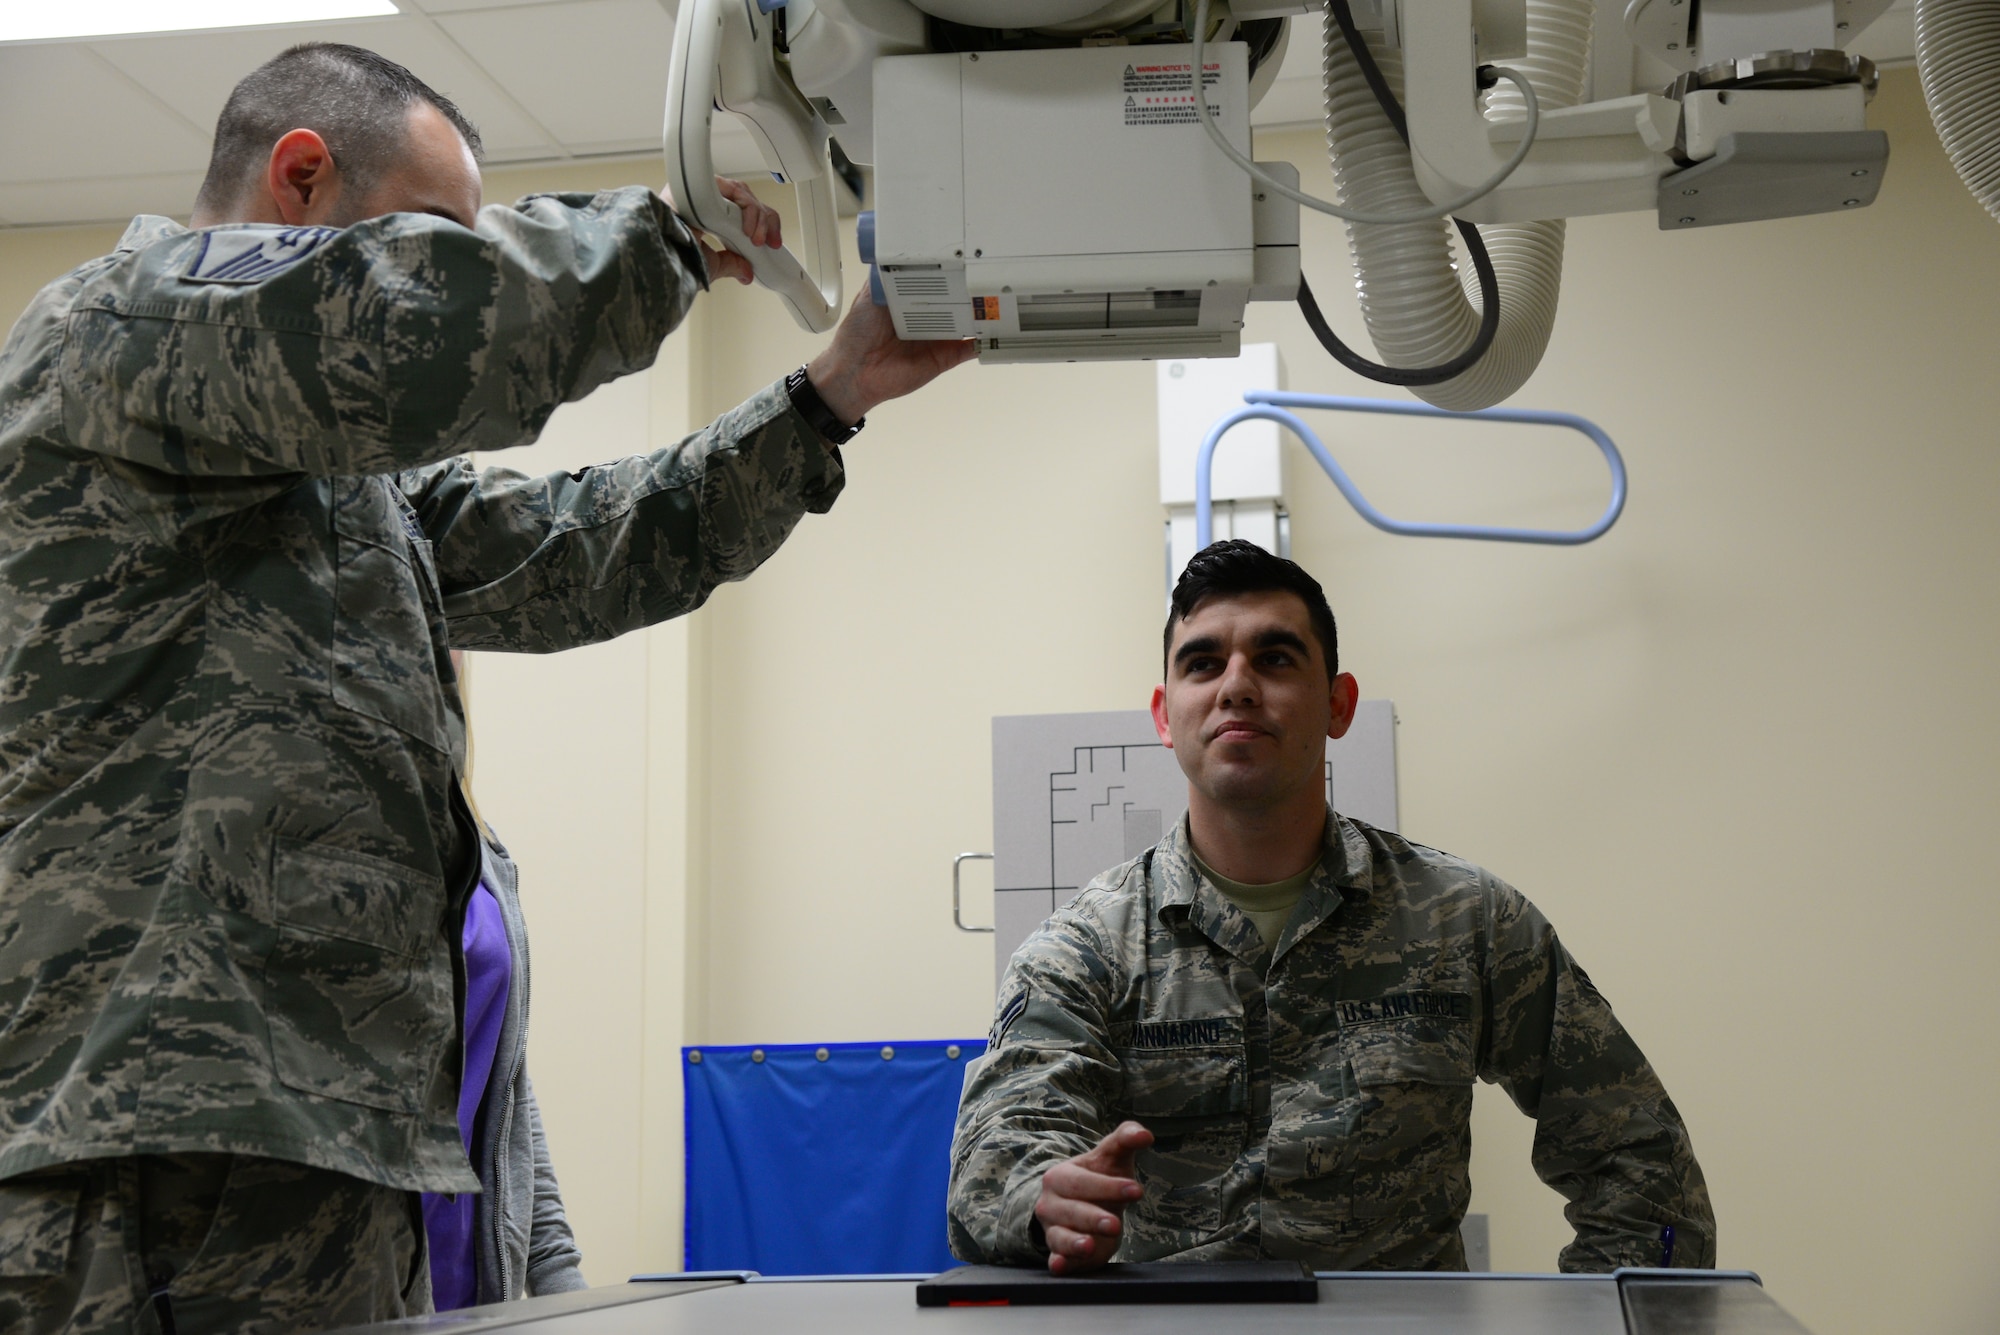 Airman 1st Class Michael Mannarino, 14th Medical Operations Squadron bioenvironmental engineer apprentice, simulates getting an X-ray Feb. 14, 2018, on Columbus Air Force Base, Mississippi. The X-ray machine works by taking 220 volts from the wall outlet and then amplify it to 100,000-140,000 volts by utilizing a transformer like machine. (U.S. Air Force photo by Airman 1st Class Beaux Hebert)